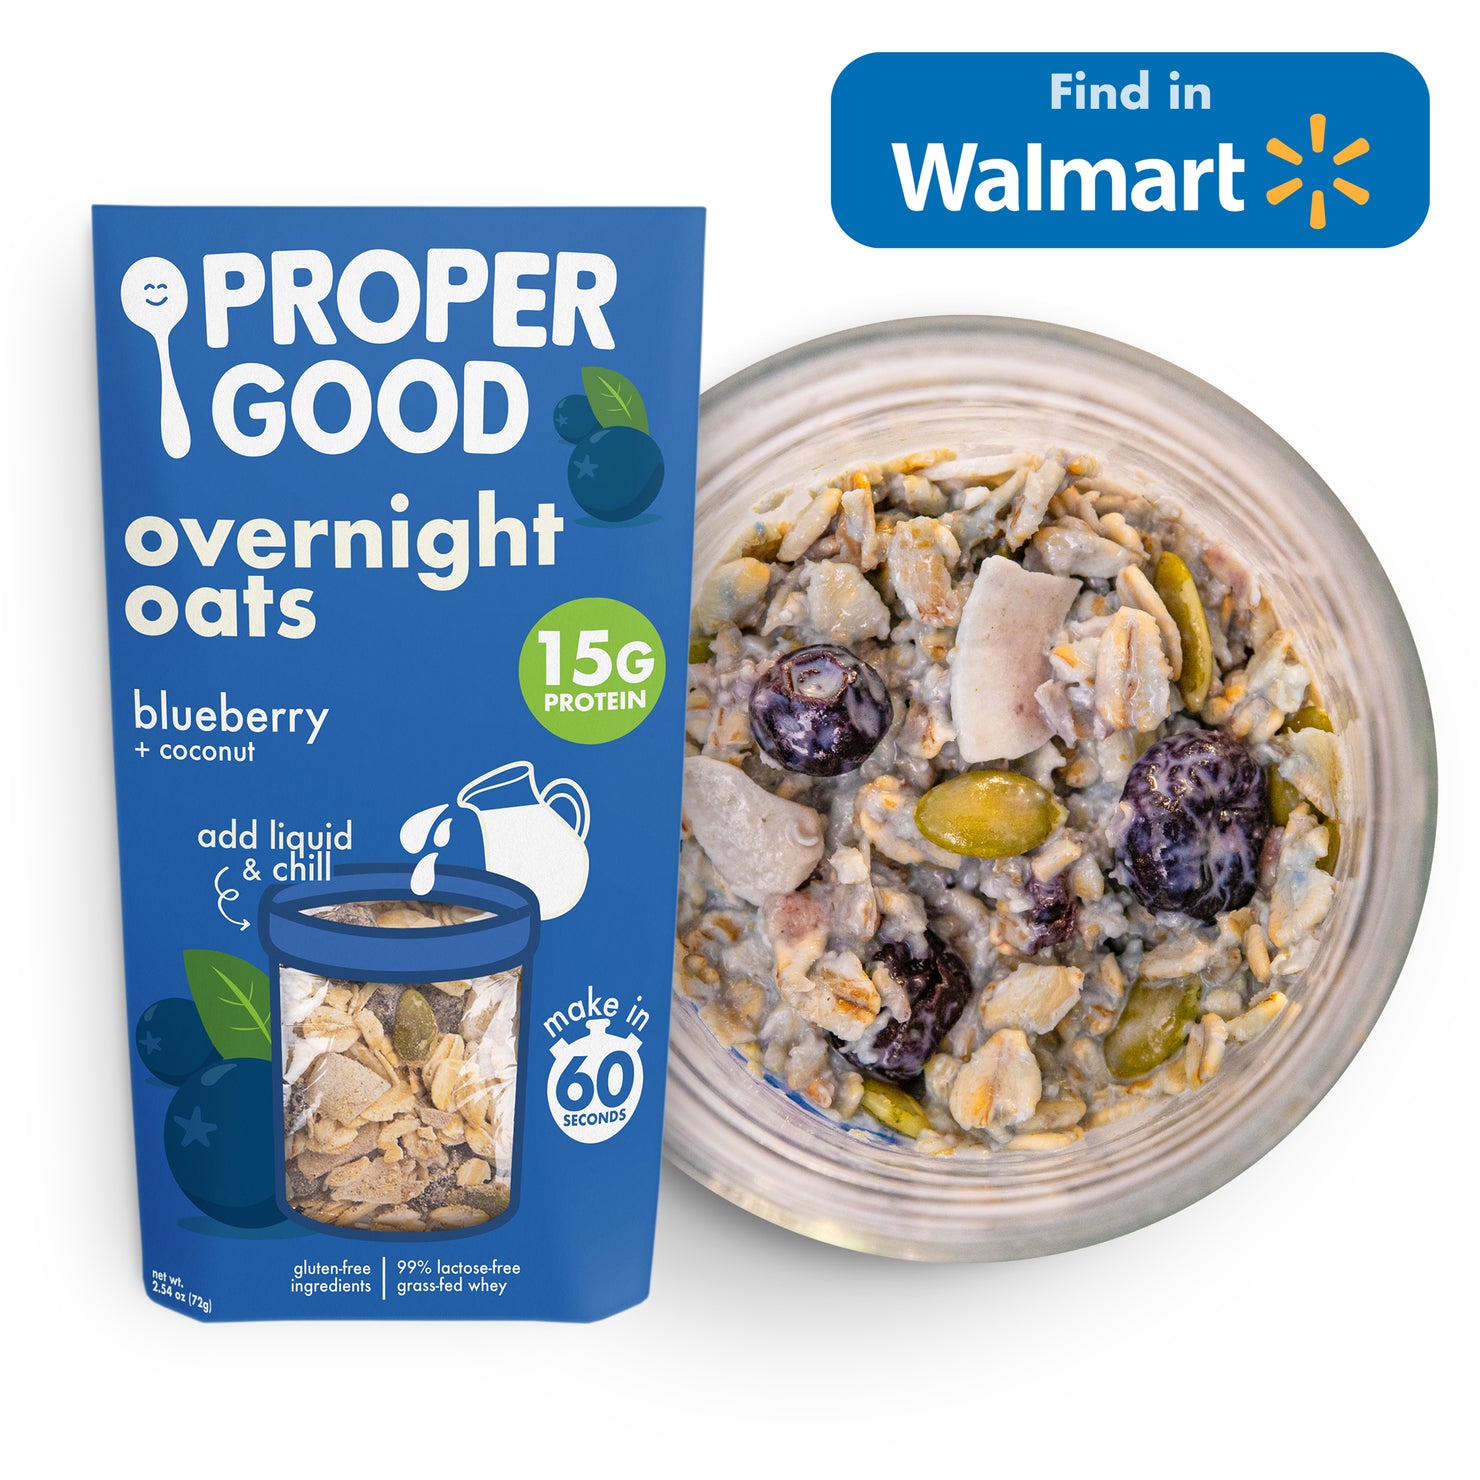 Blueberry Coconut Overnight Oats 15g Whey Protein - Find in Walmart - Eat Proper Good